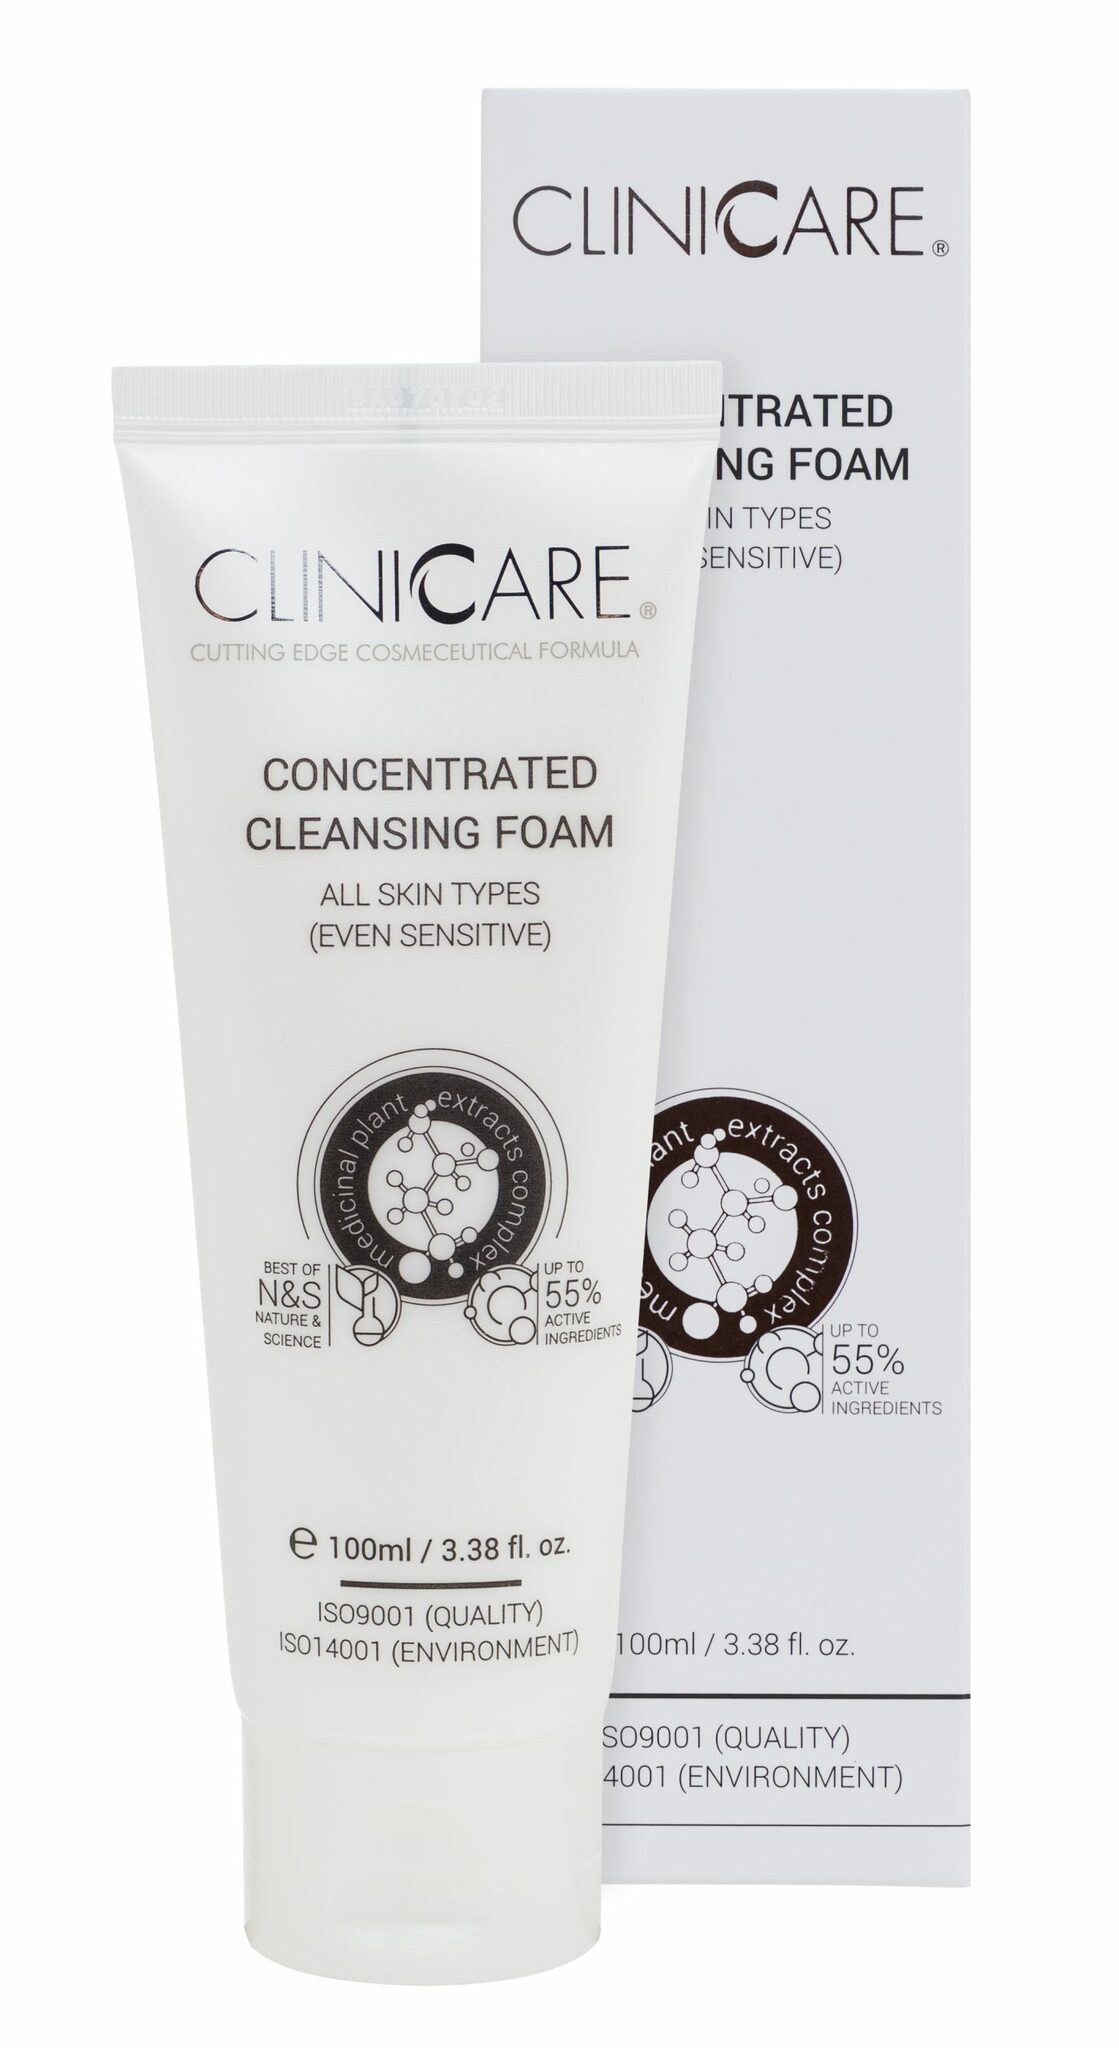 Clinicare concentrated cleansing foam